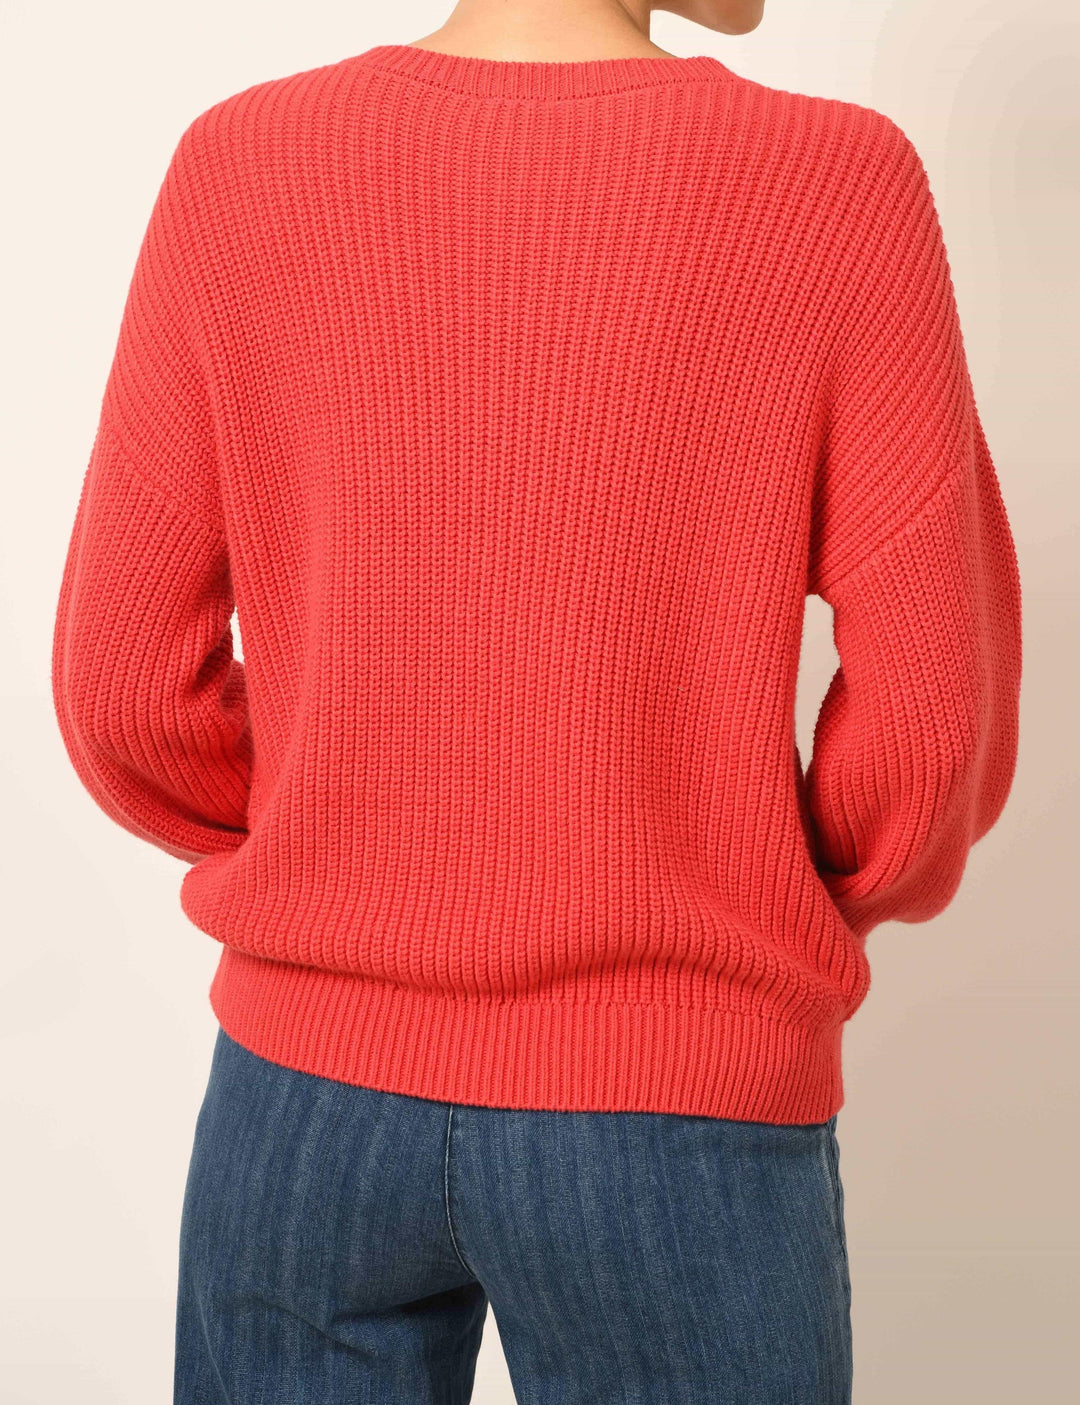 Monceau Sweater - Candy - S